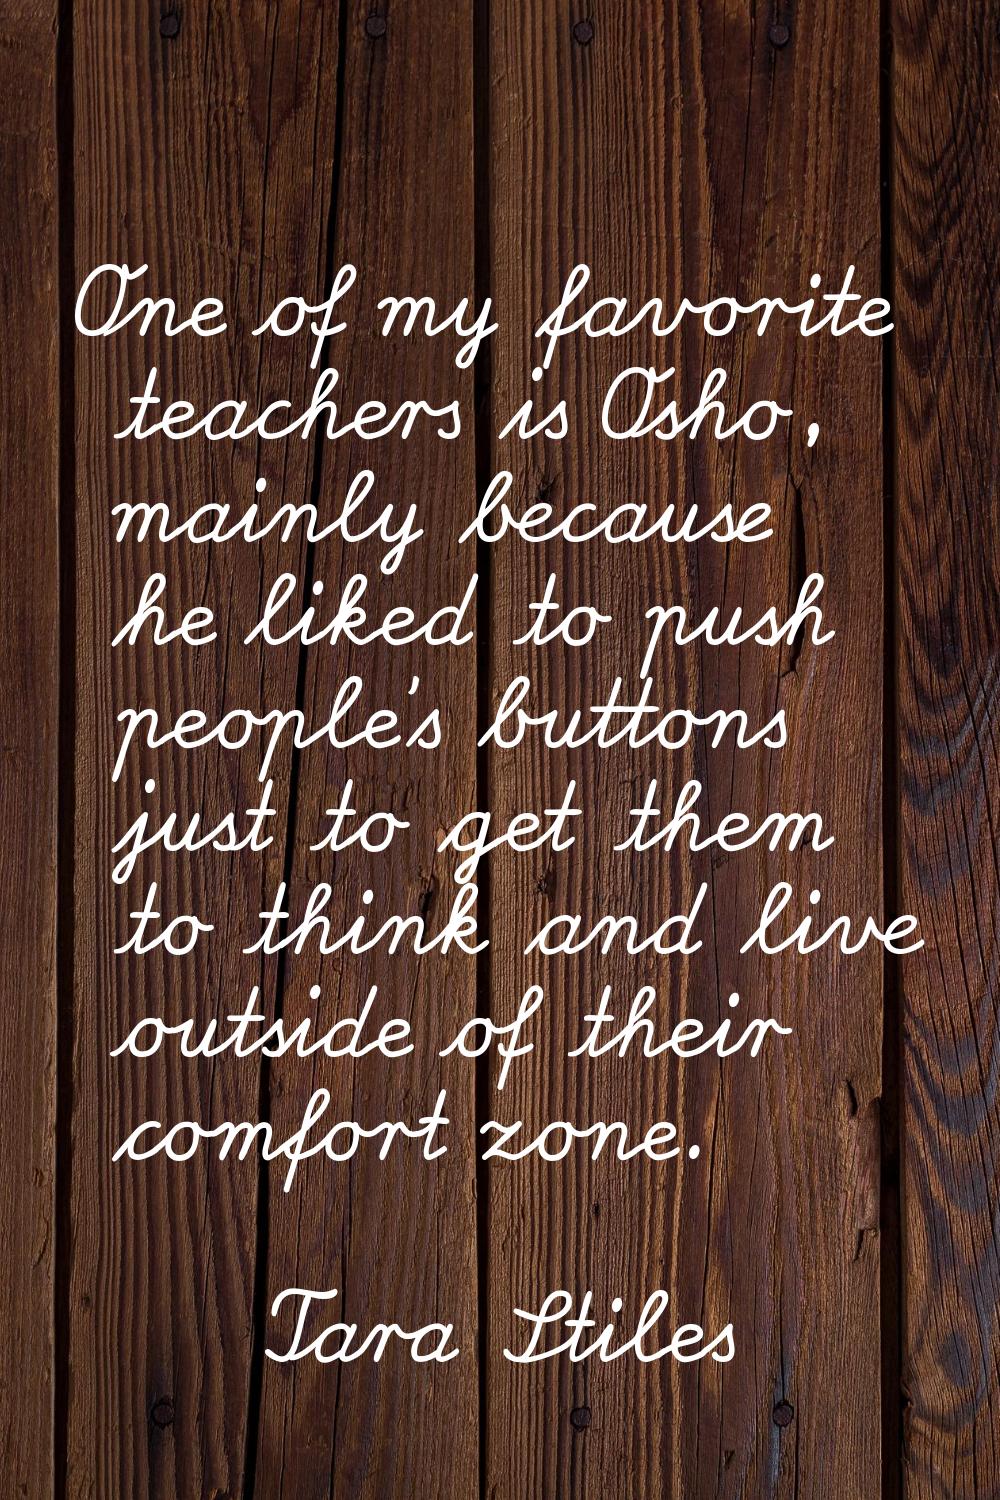 One of my favorite teachers is Osho, mainly because he liked to push people's buttons just to get t